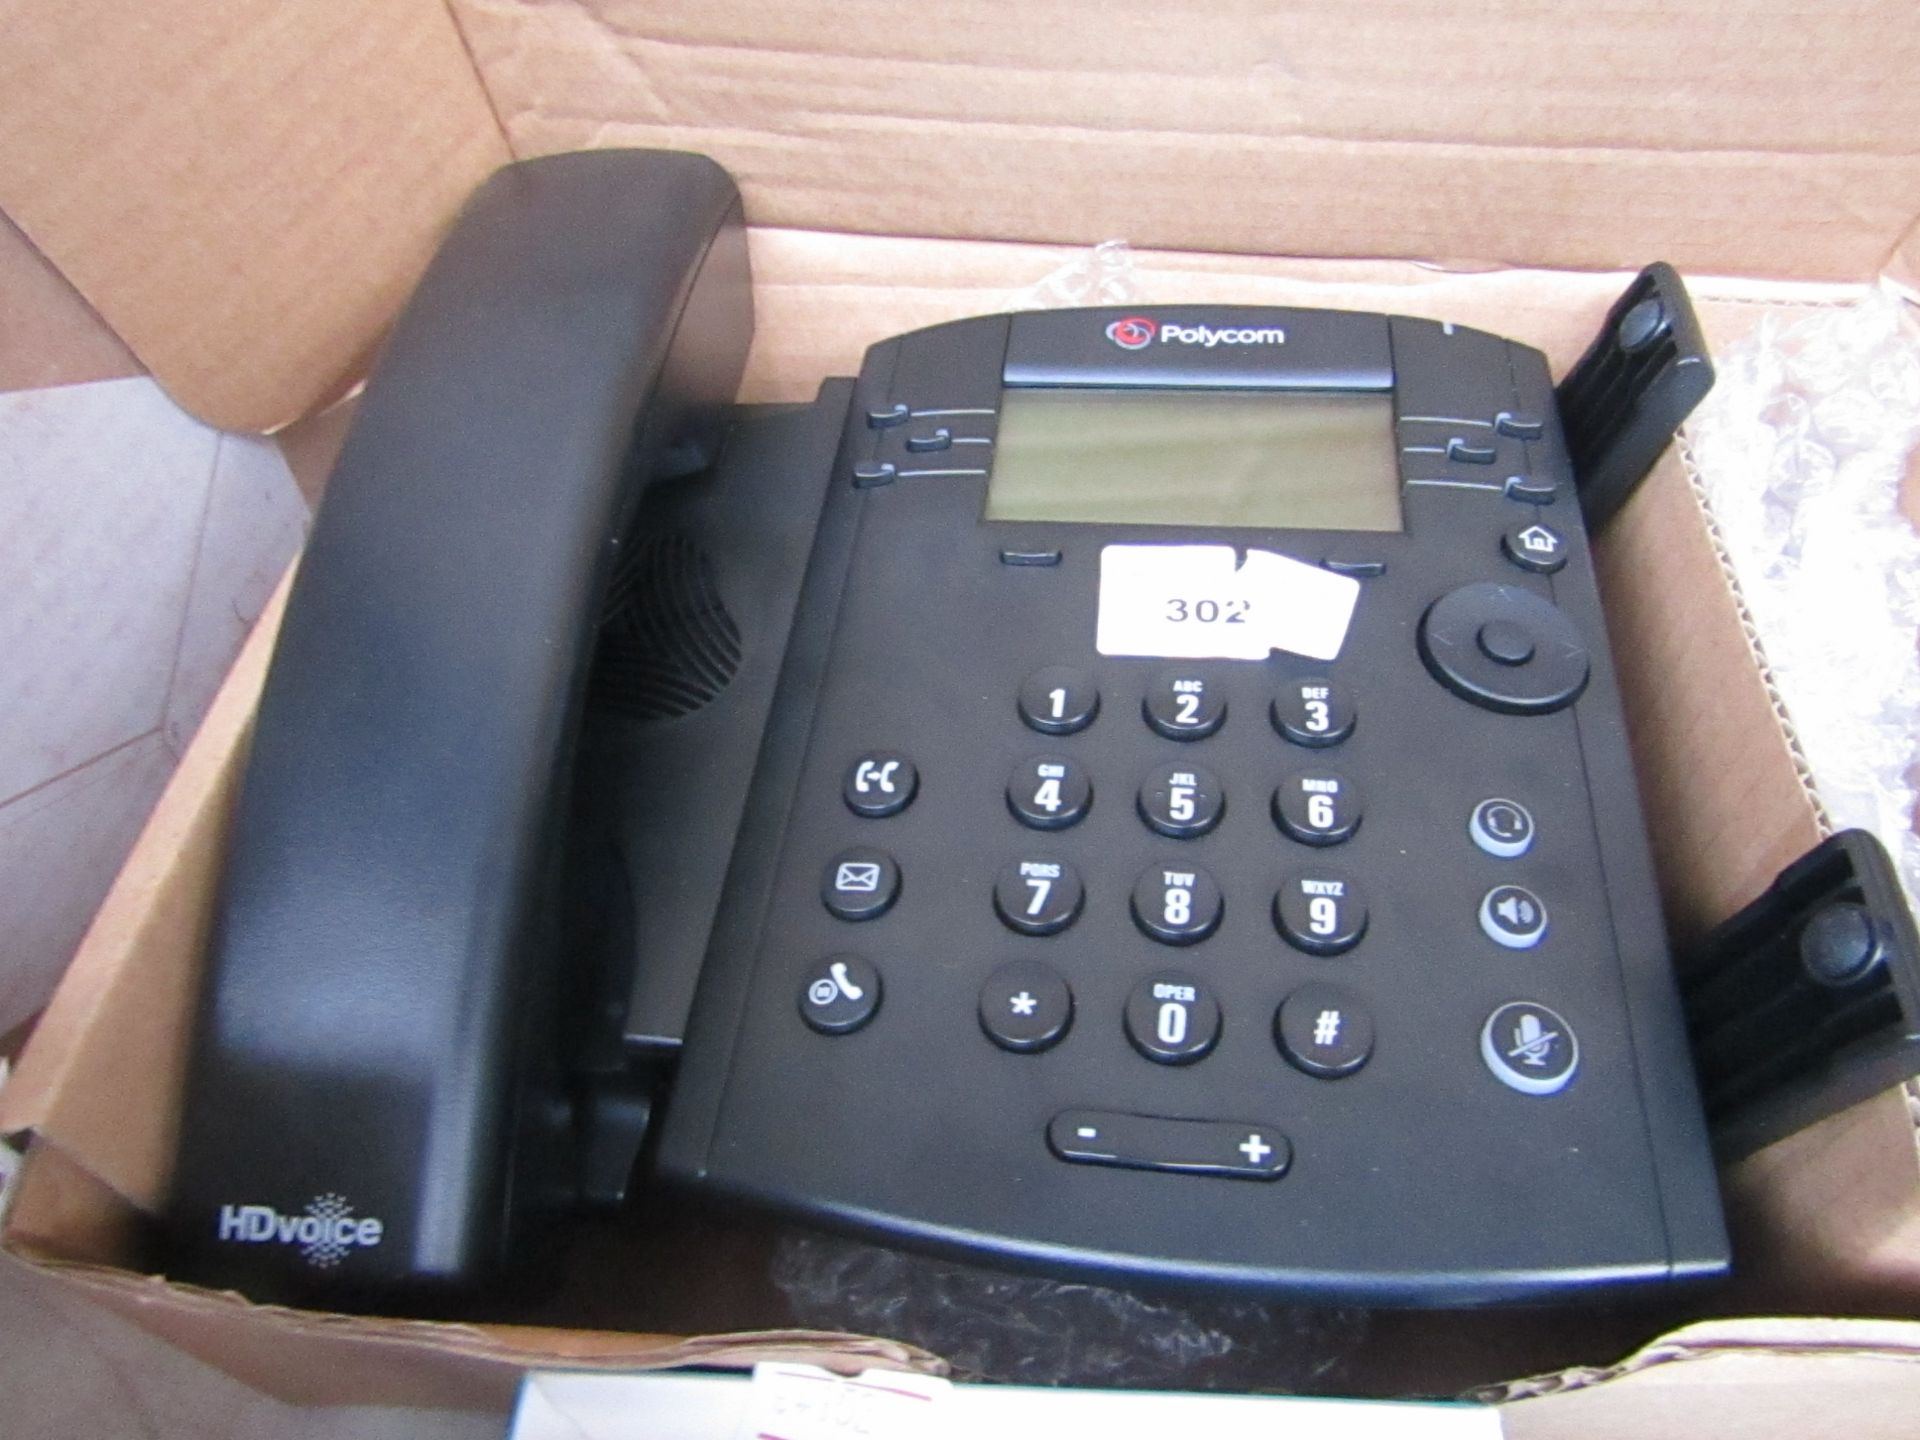 Polycom - Landline phone - (Call centre type) - Untested and boxed.